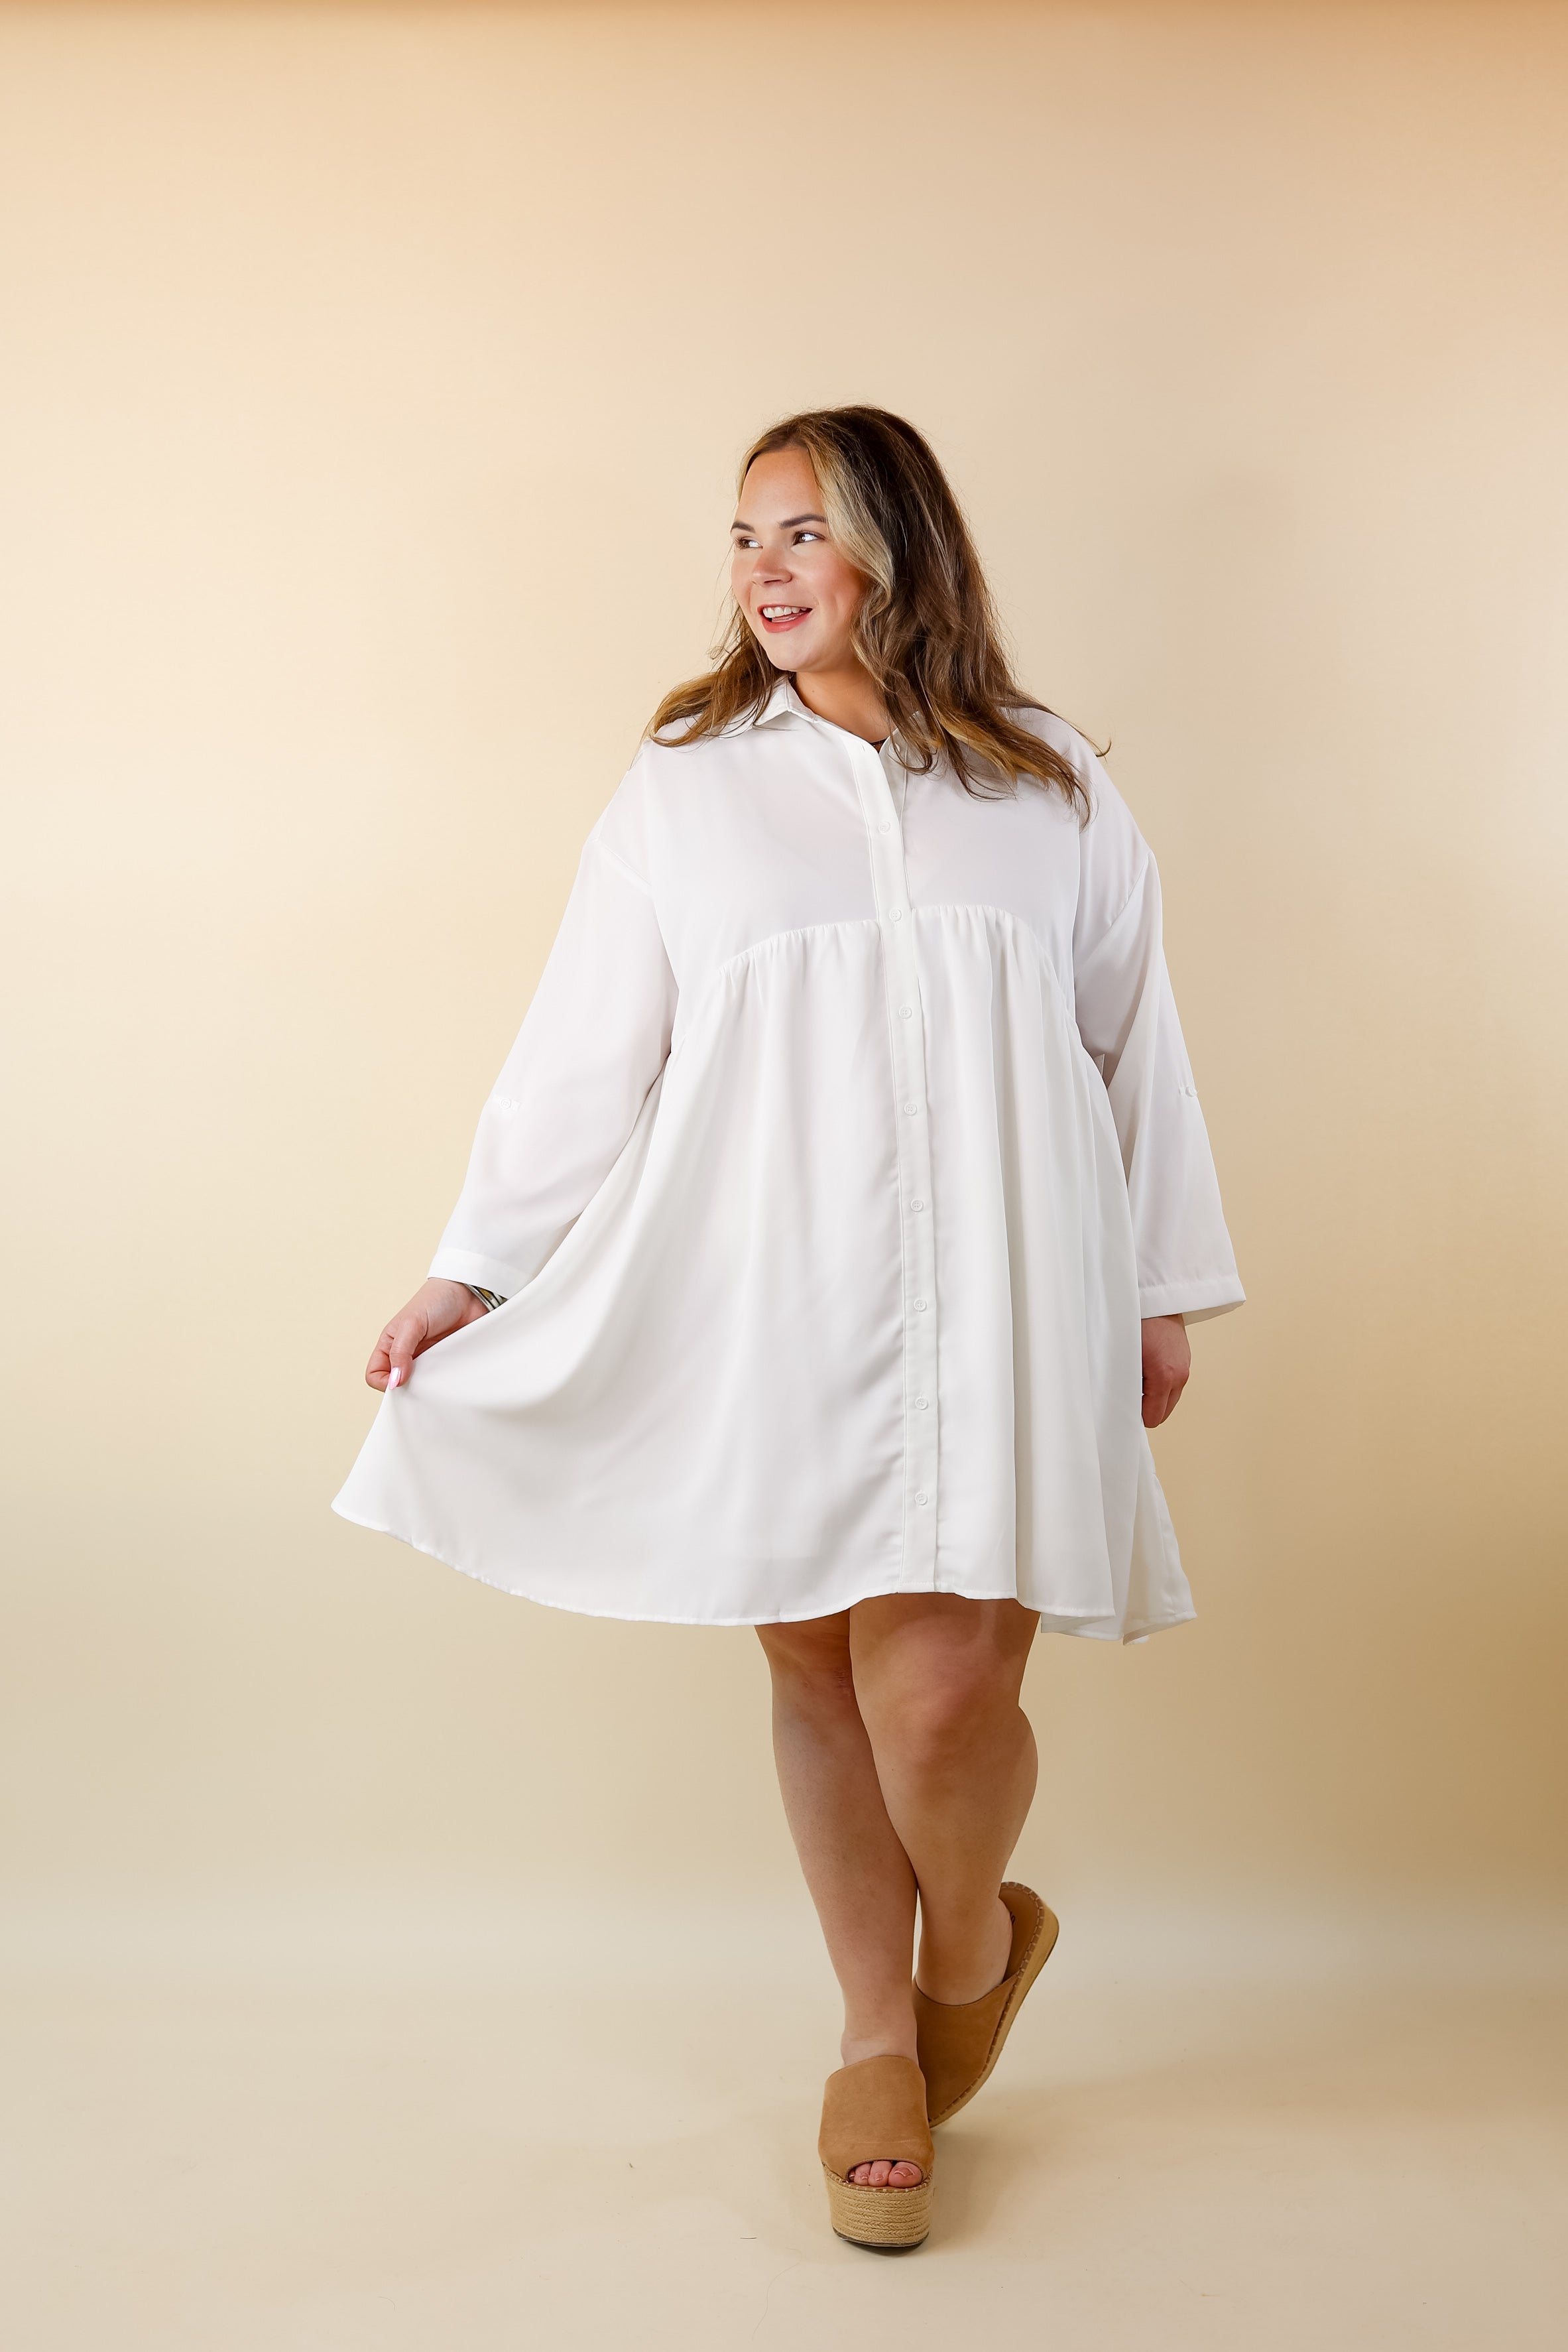 Risky Business Button Up Babydoll Dress in White - Giddy Up Glamour Boutique